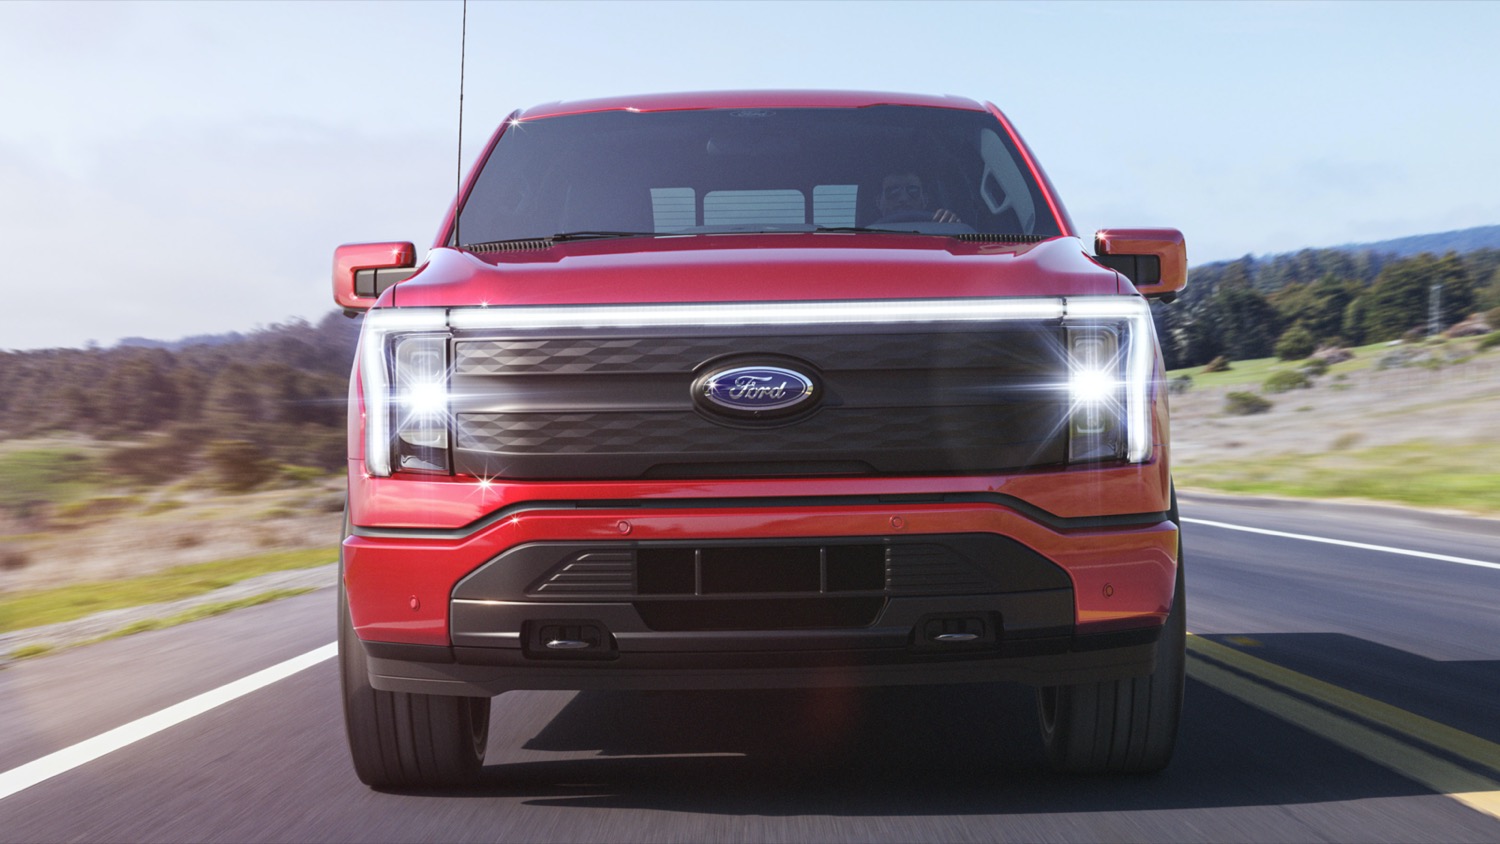 2023 Ford F-150 Electric Pickup Will Resurrect The Lightning Name